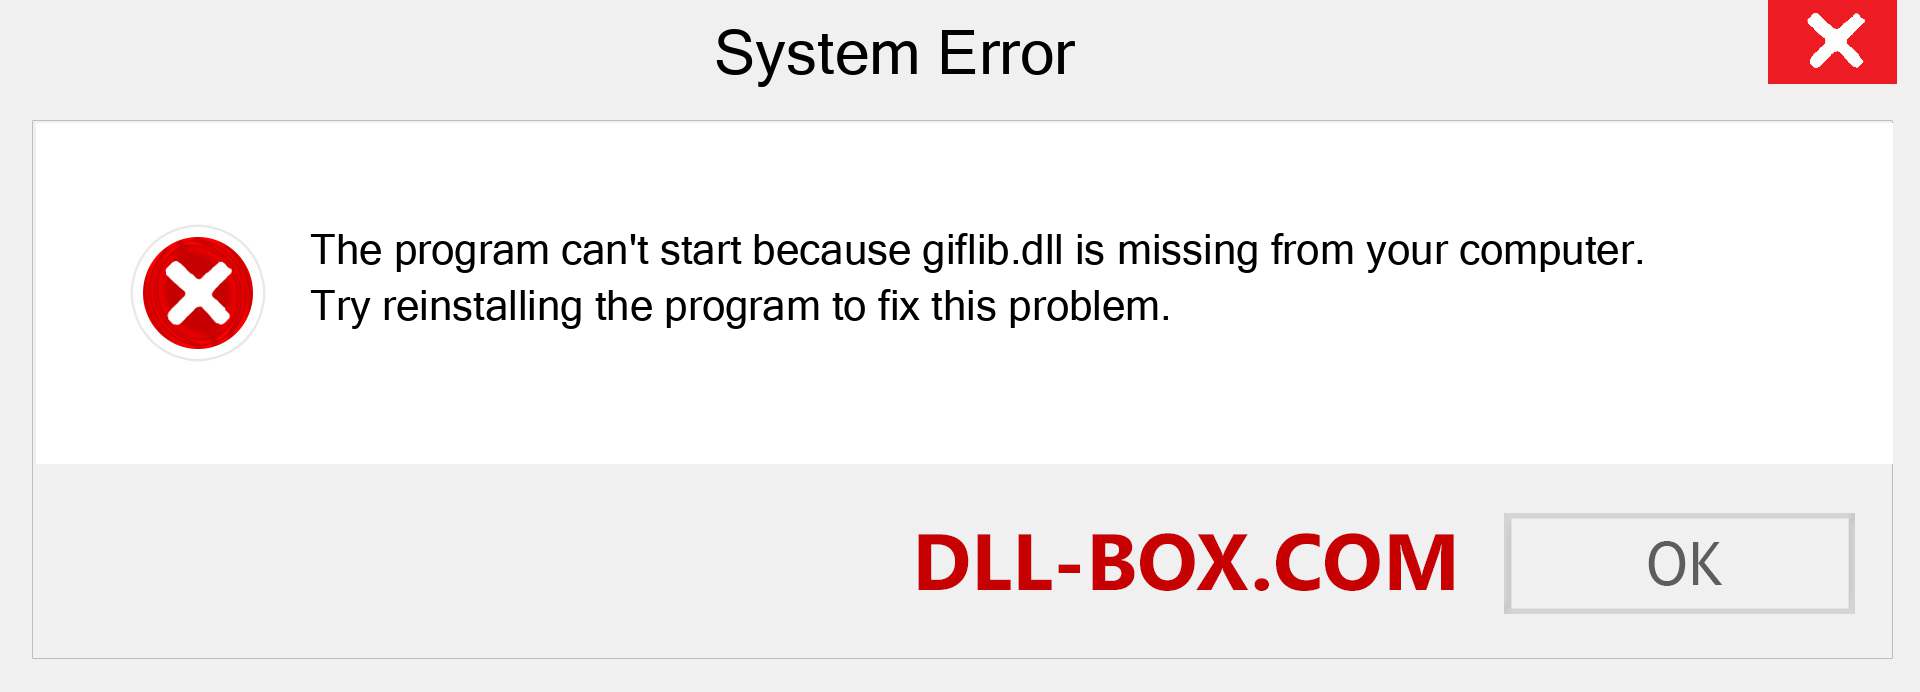  giflib.dll file is missing?. Download for Windows 7, 8, 10 - Fix  giflib dll Missing Error on Windows, photos, images